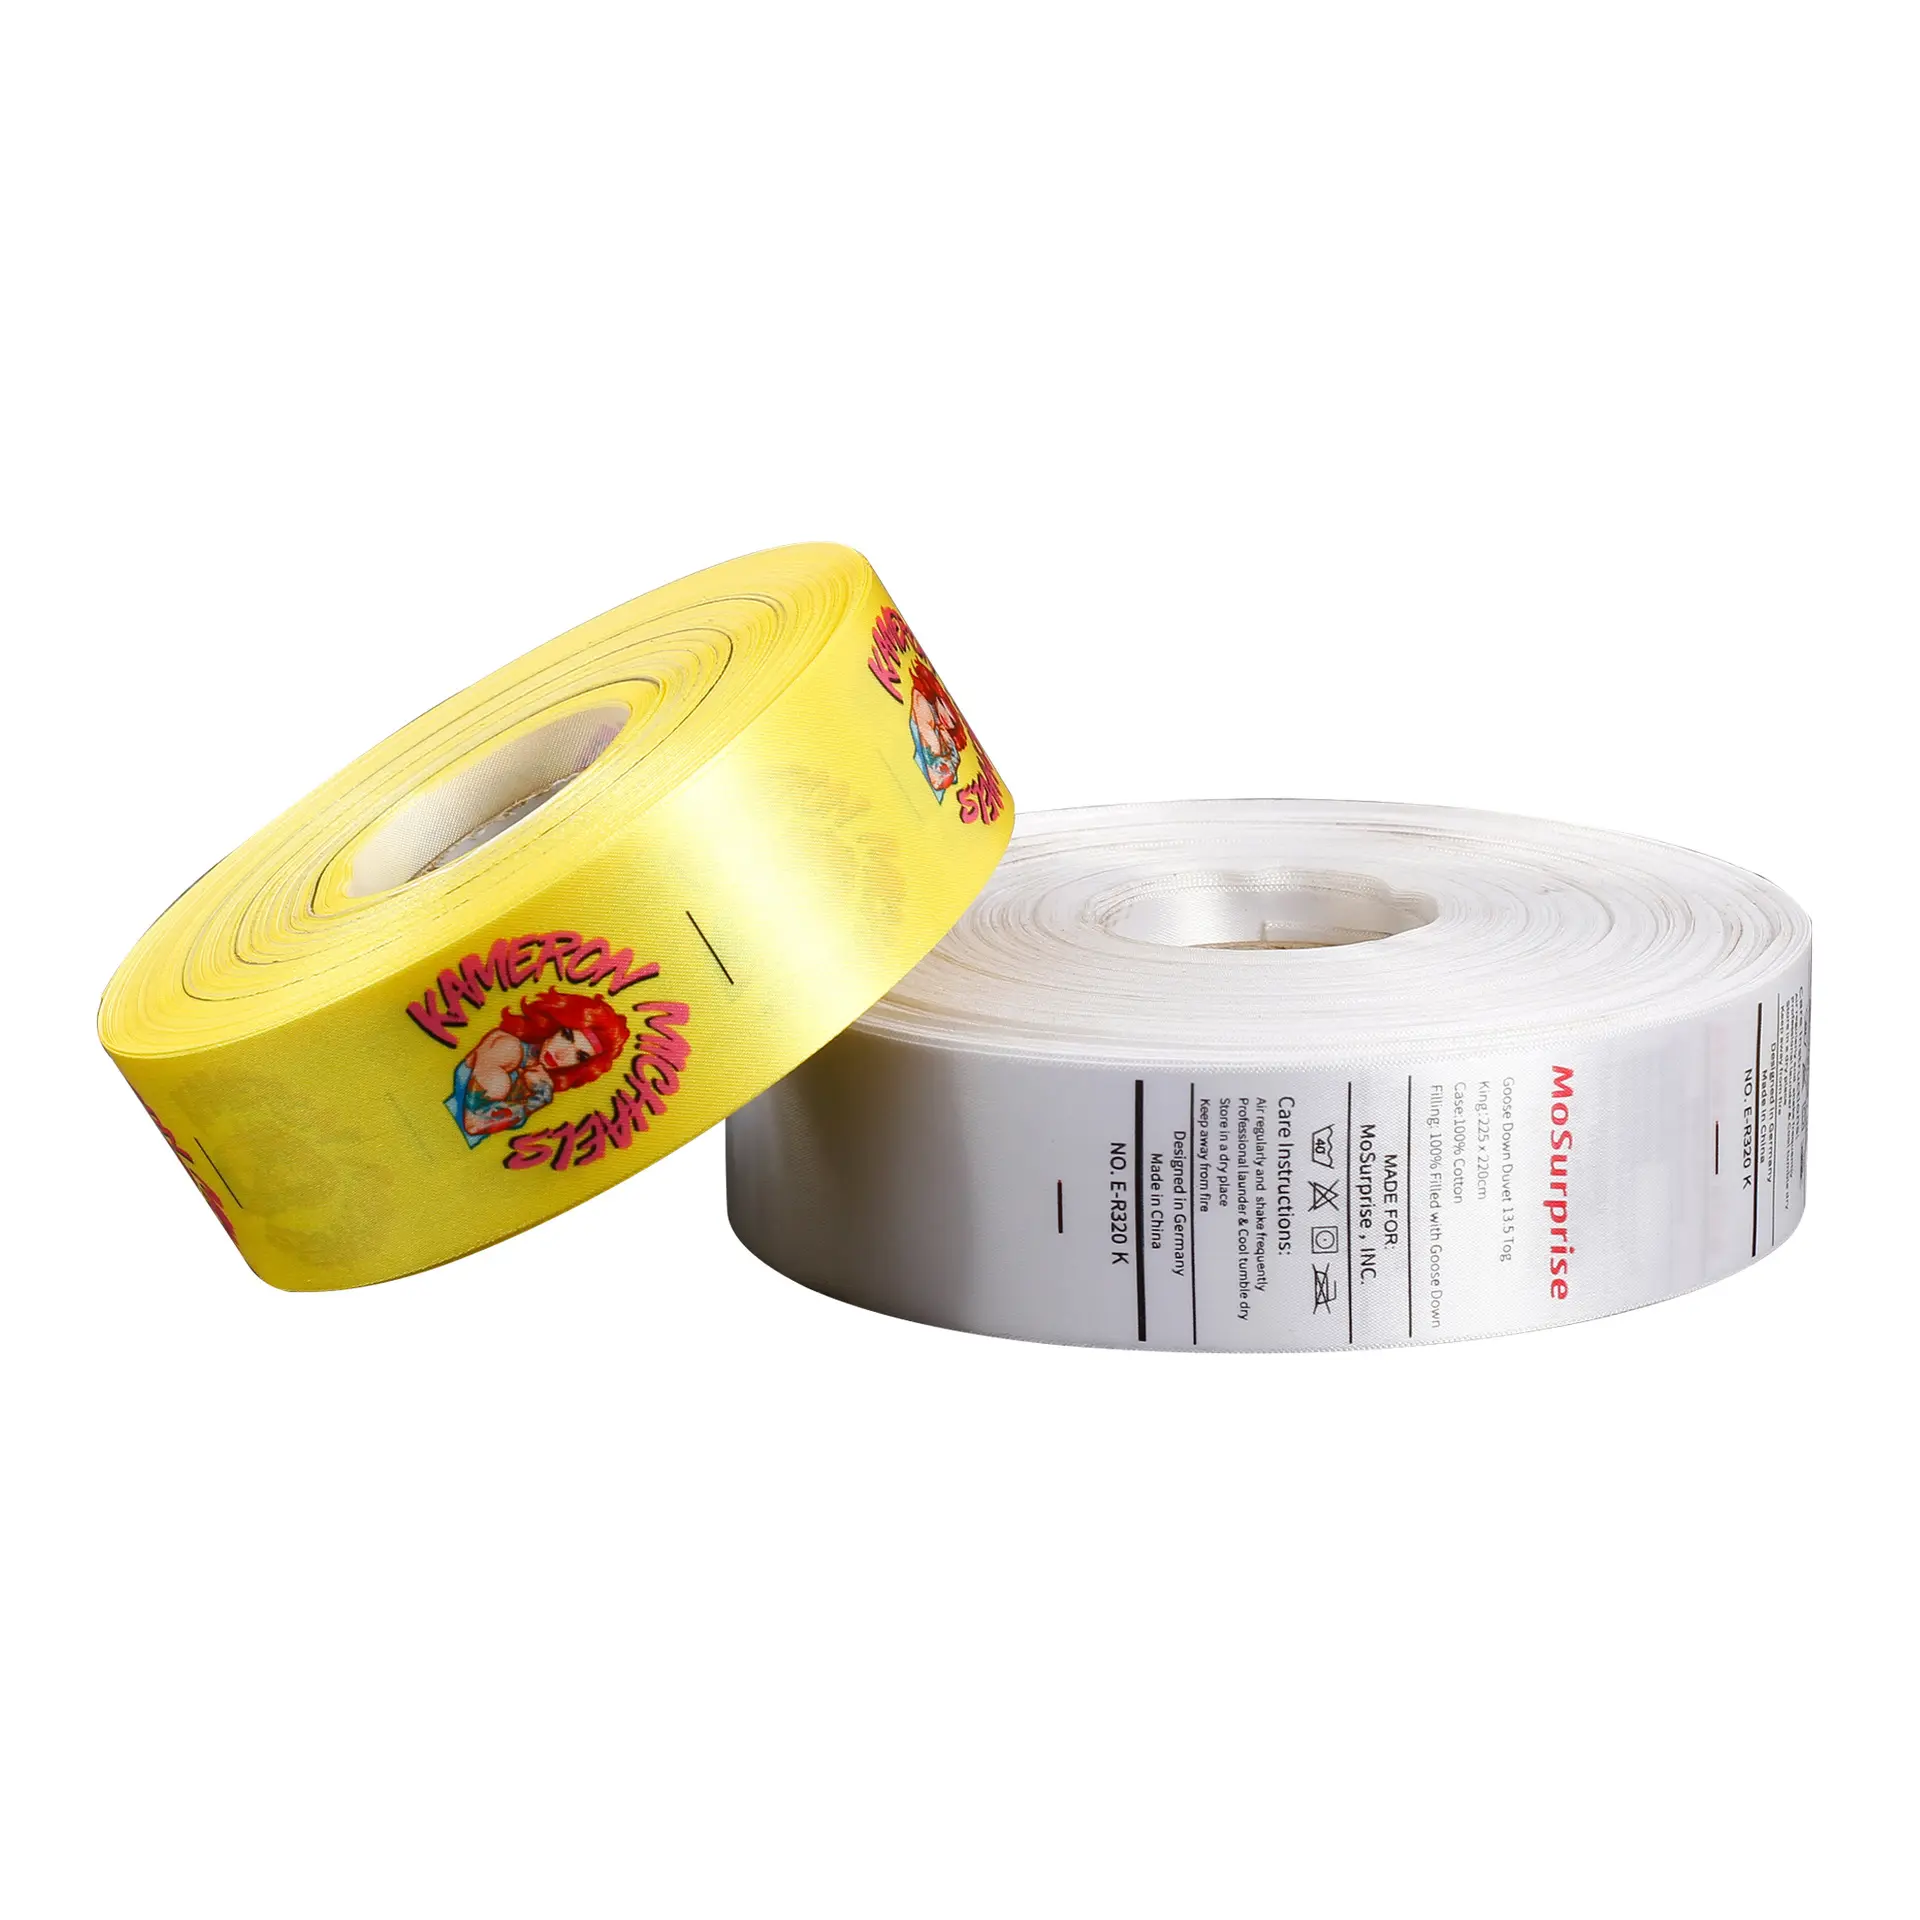 Custom roll packing custom satin care label printing printed sew in labels care labels for garment